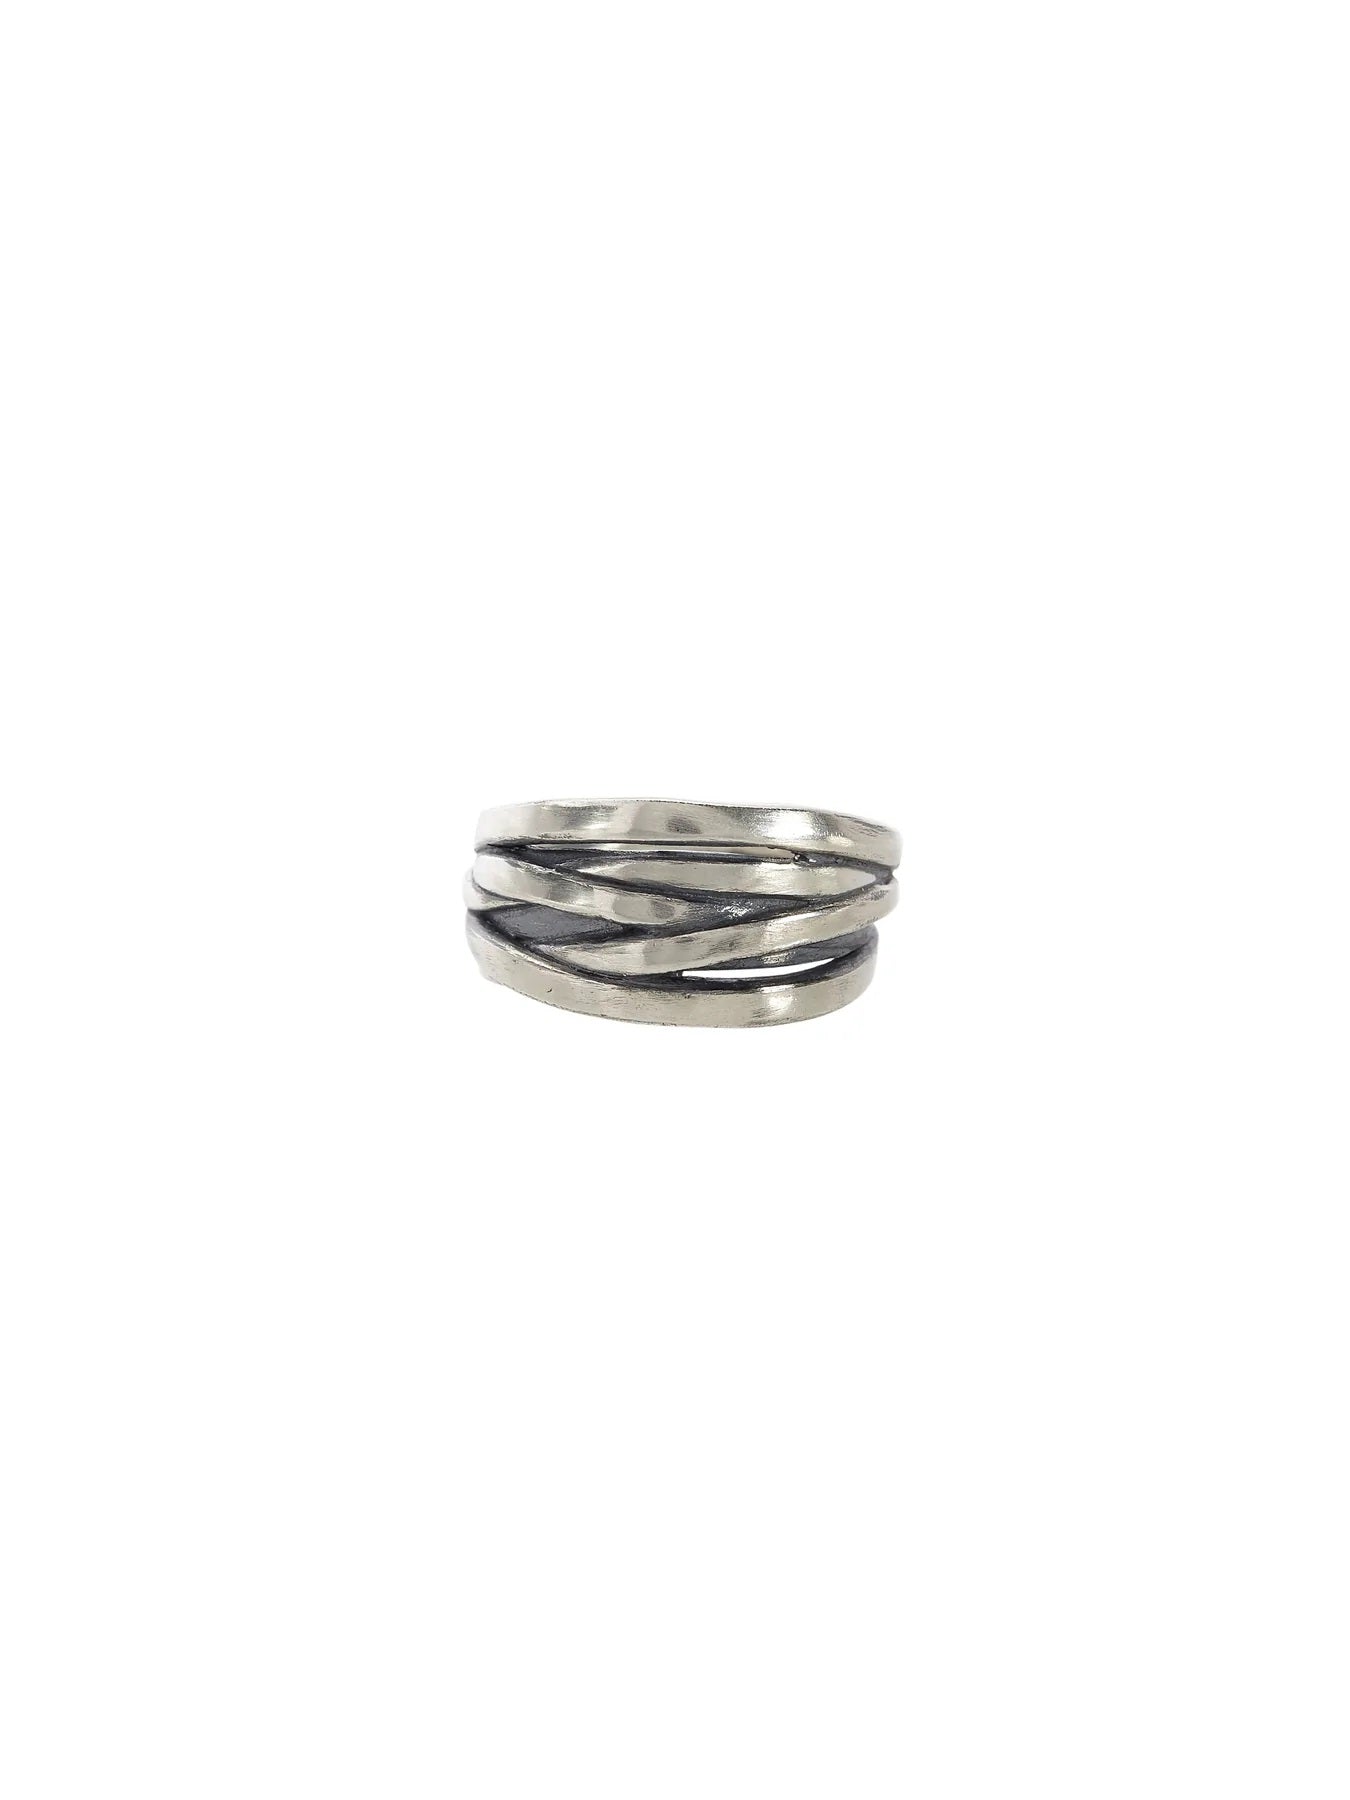 WRAP STERLING SILVER BAND RING